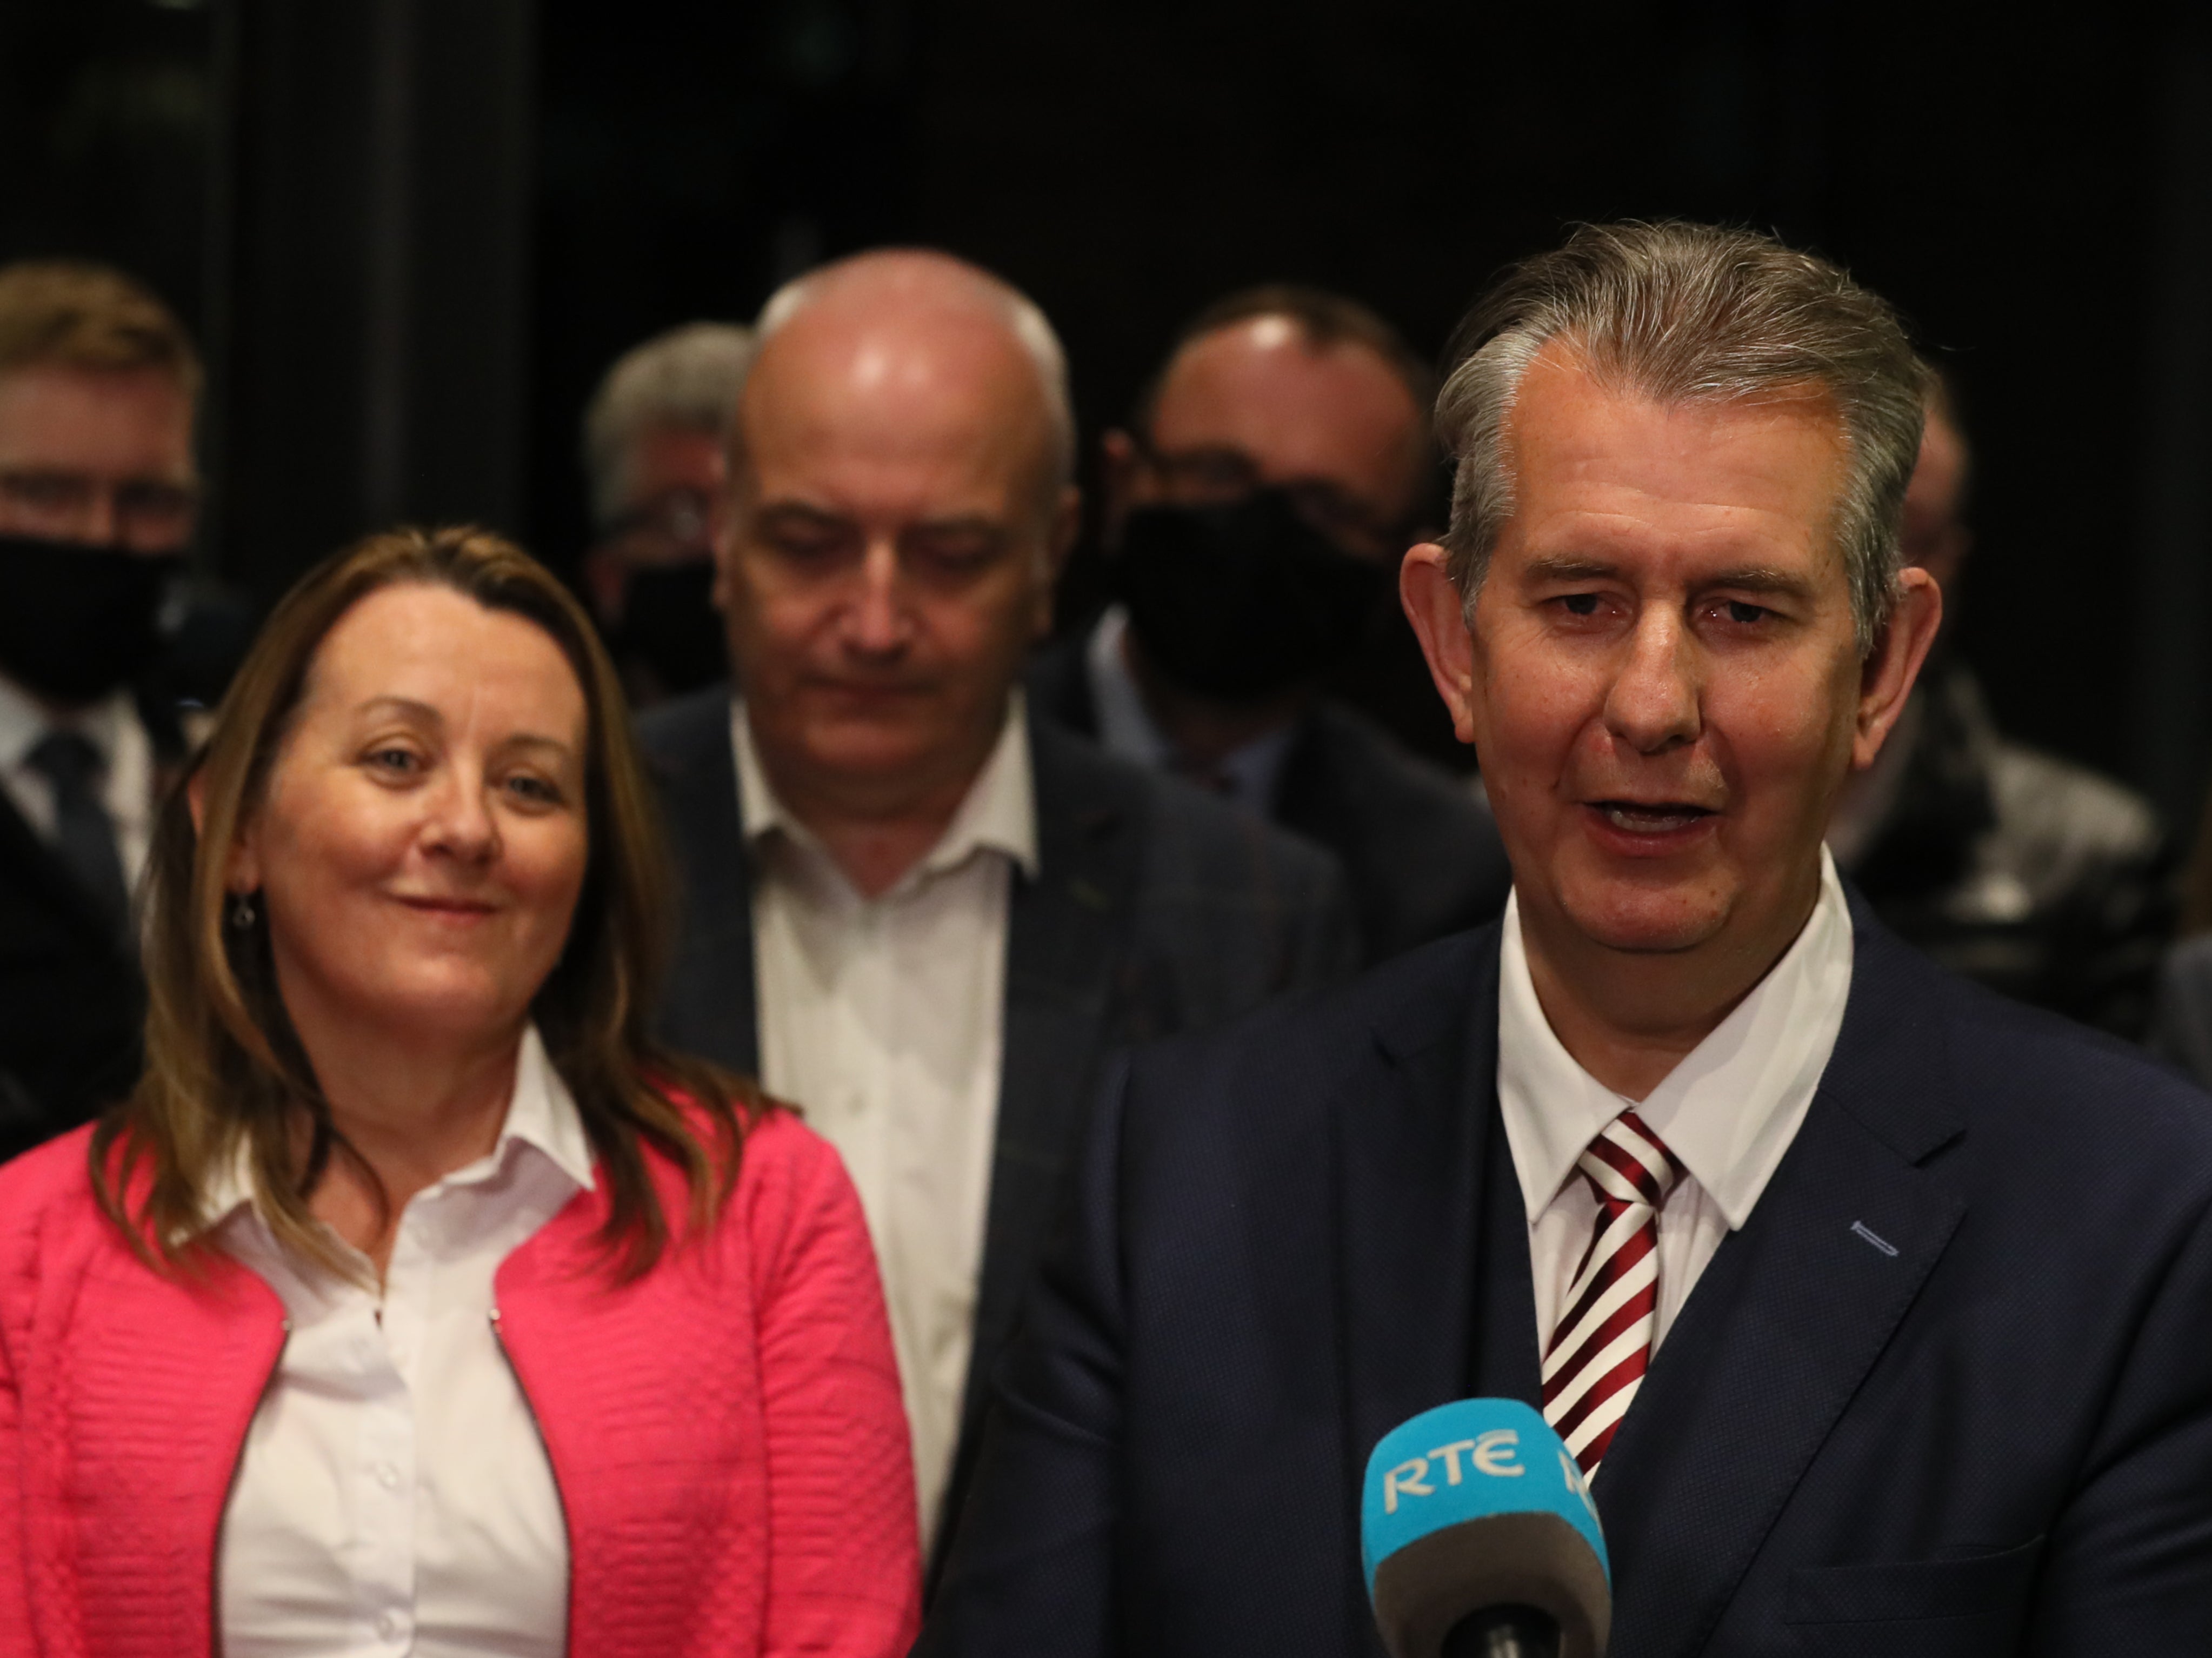 Edwin Poots, the new DUP leader, with Paula Bradley, his deputy